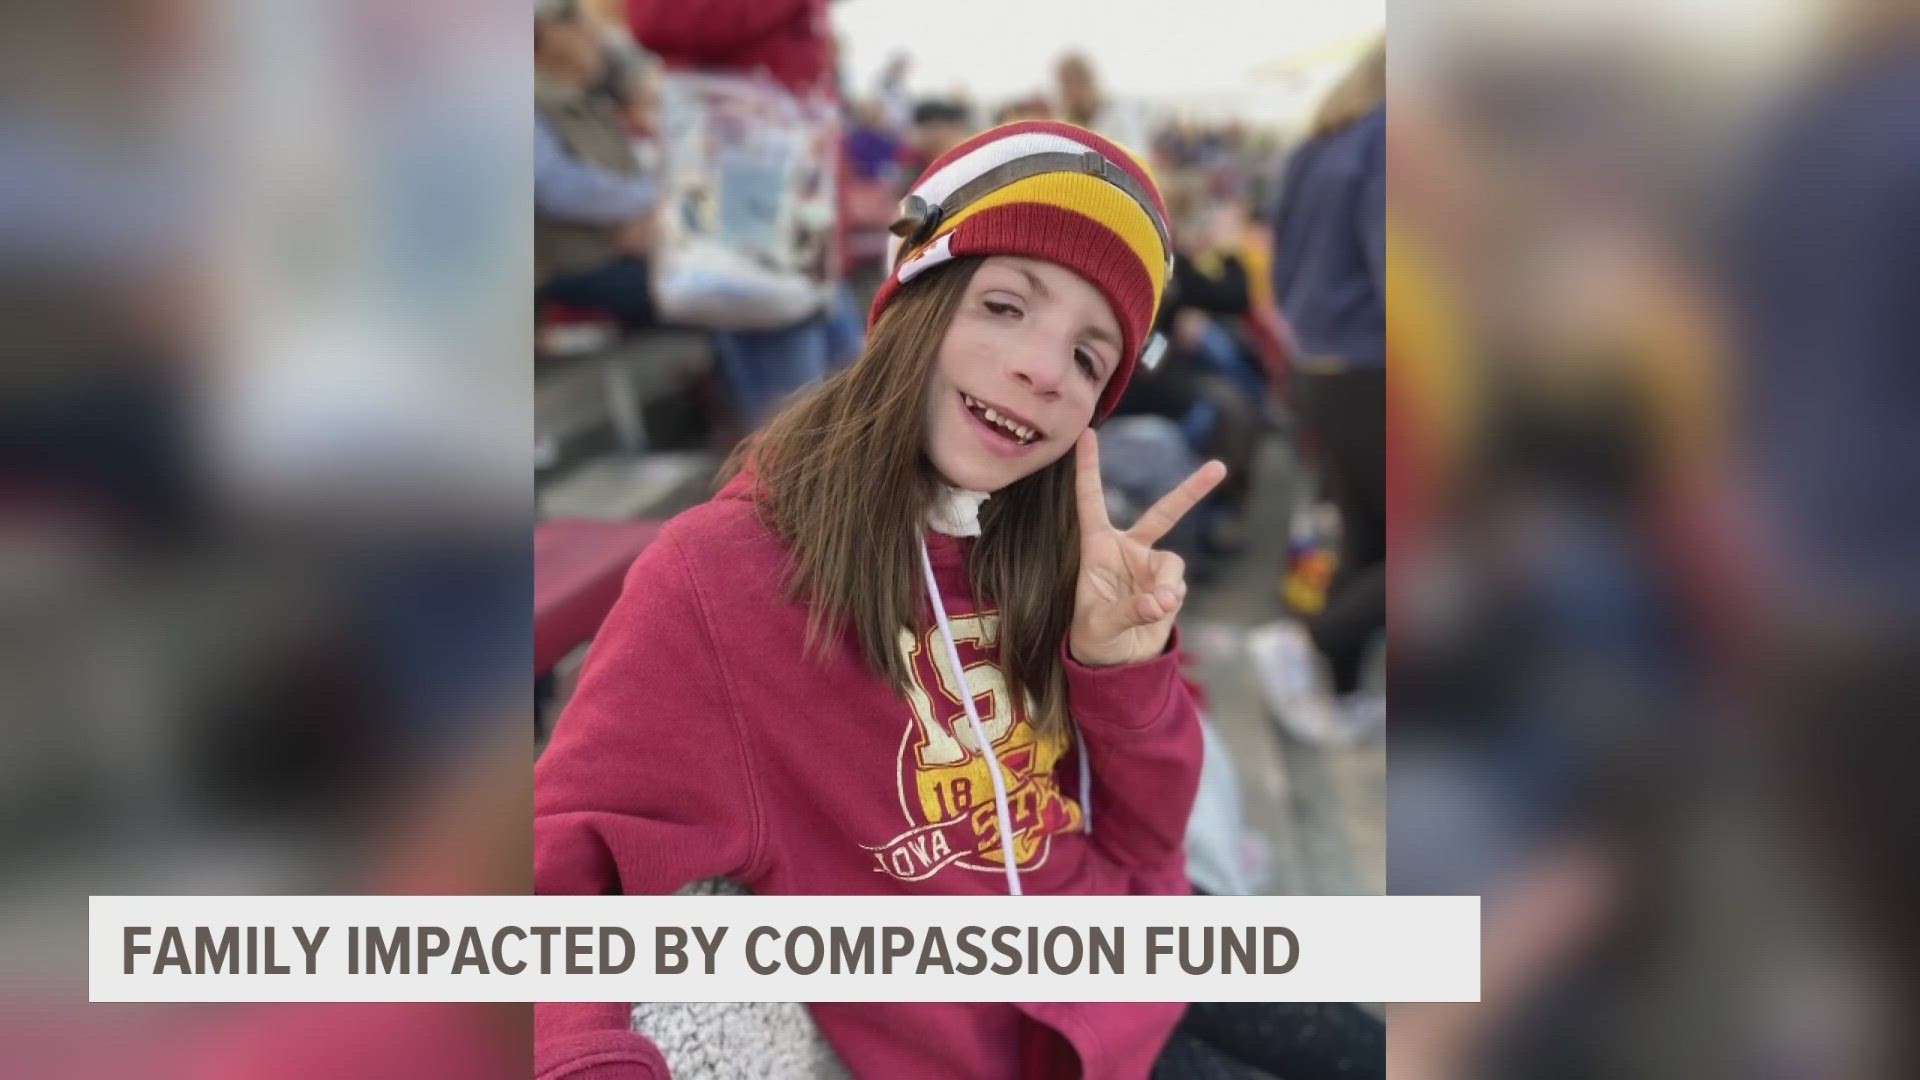 10-year-old Harper Wright has spent much of her life at doctor's offices, and Variety Iowa's Compassion Fund is helping her family continue her care.